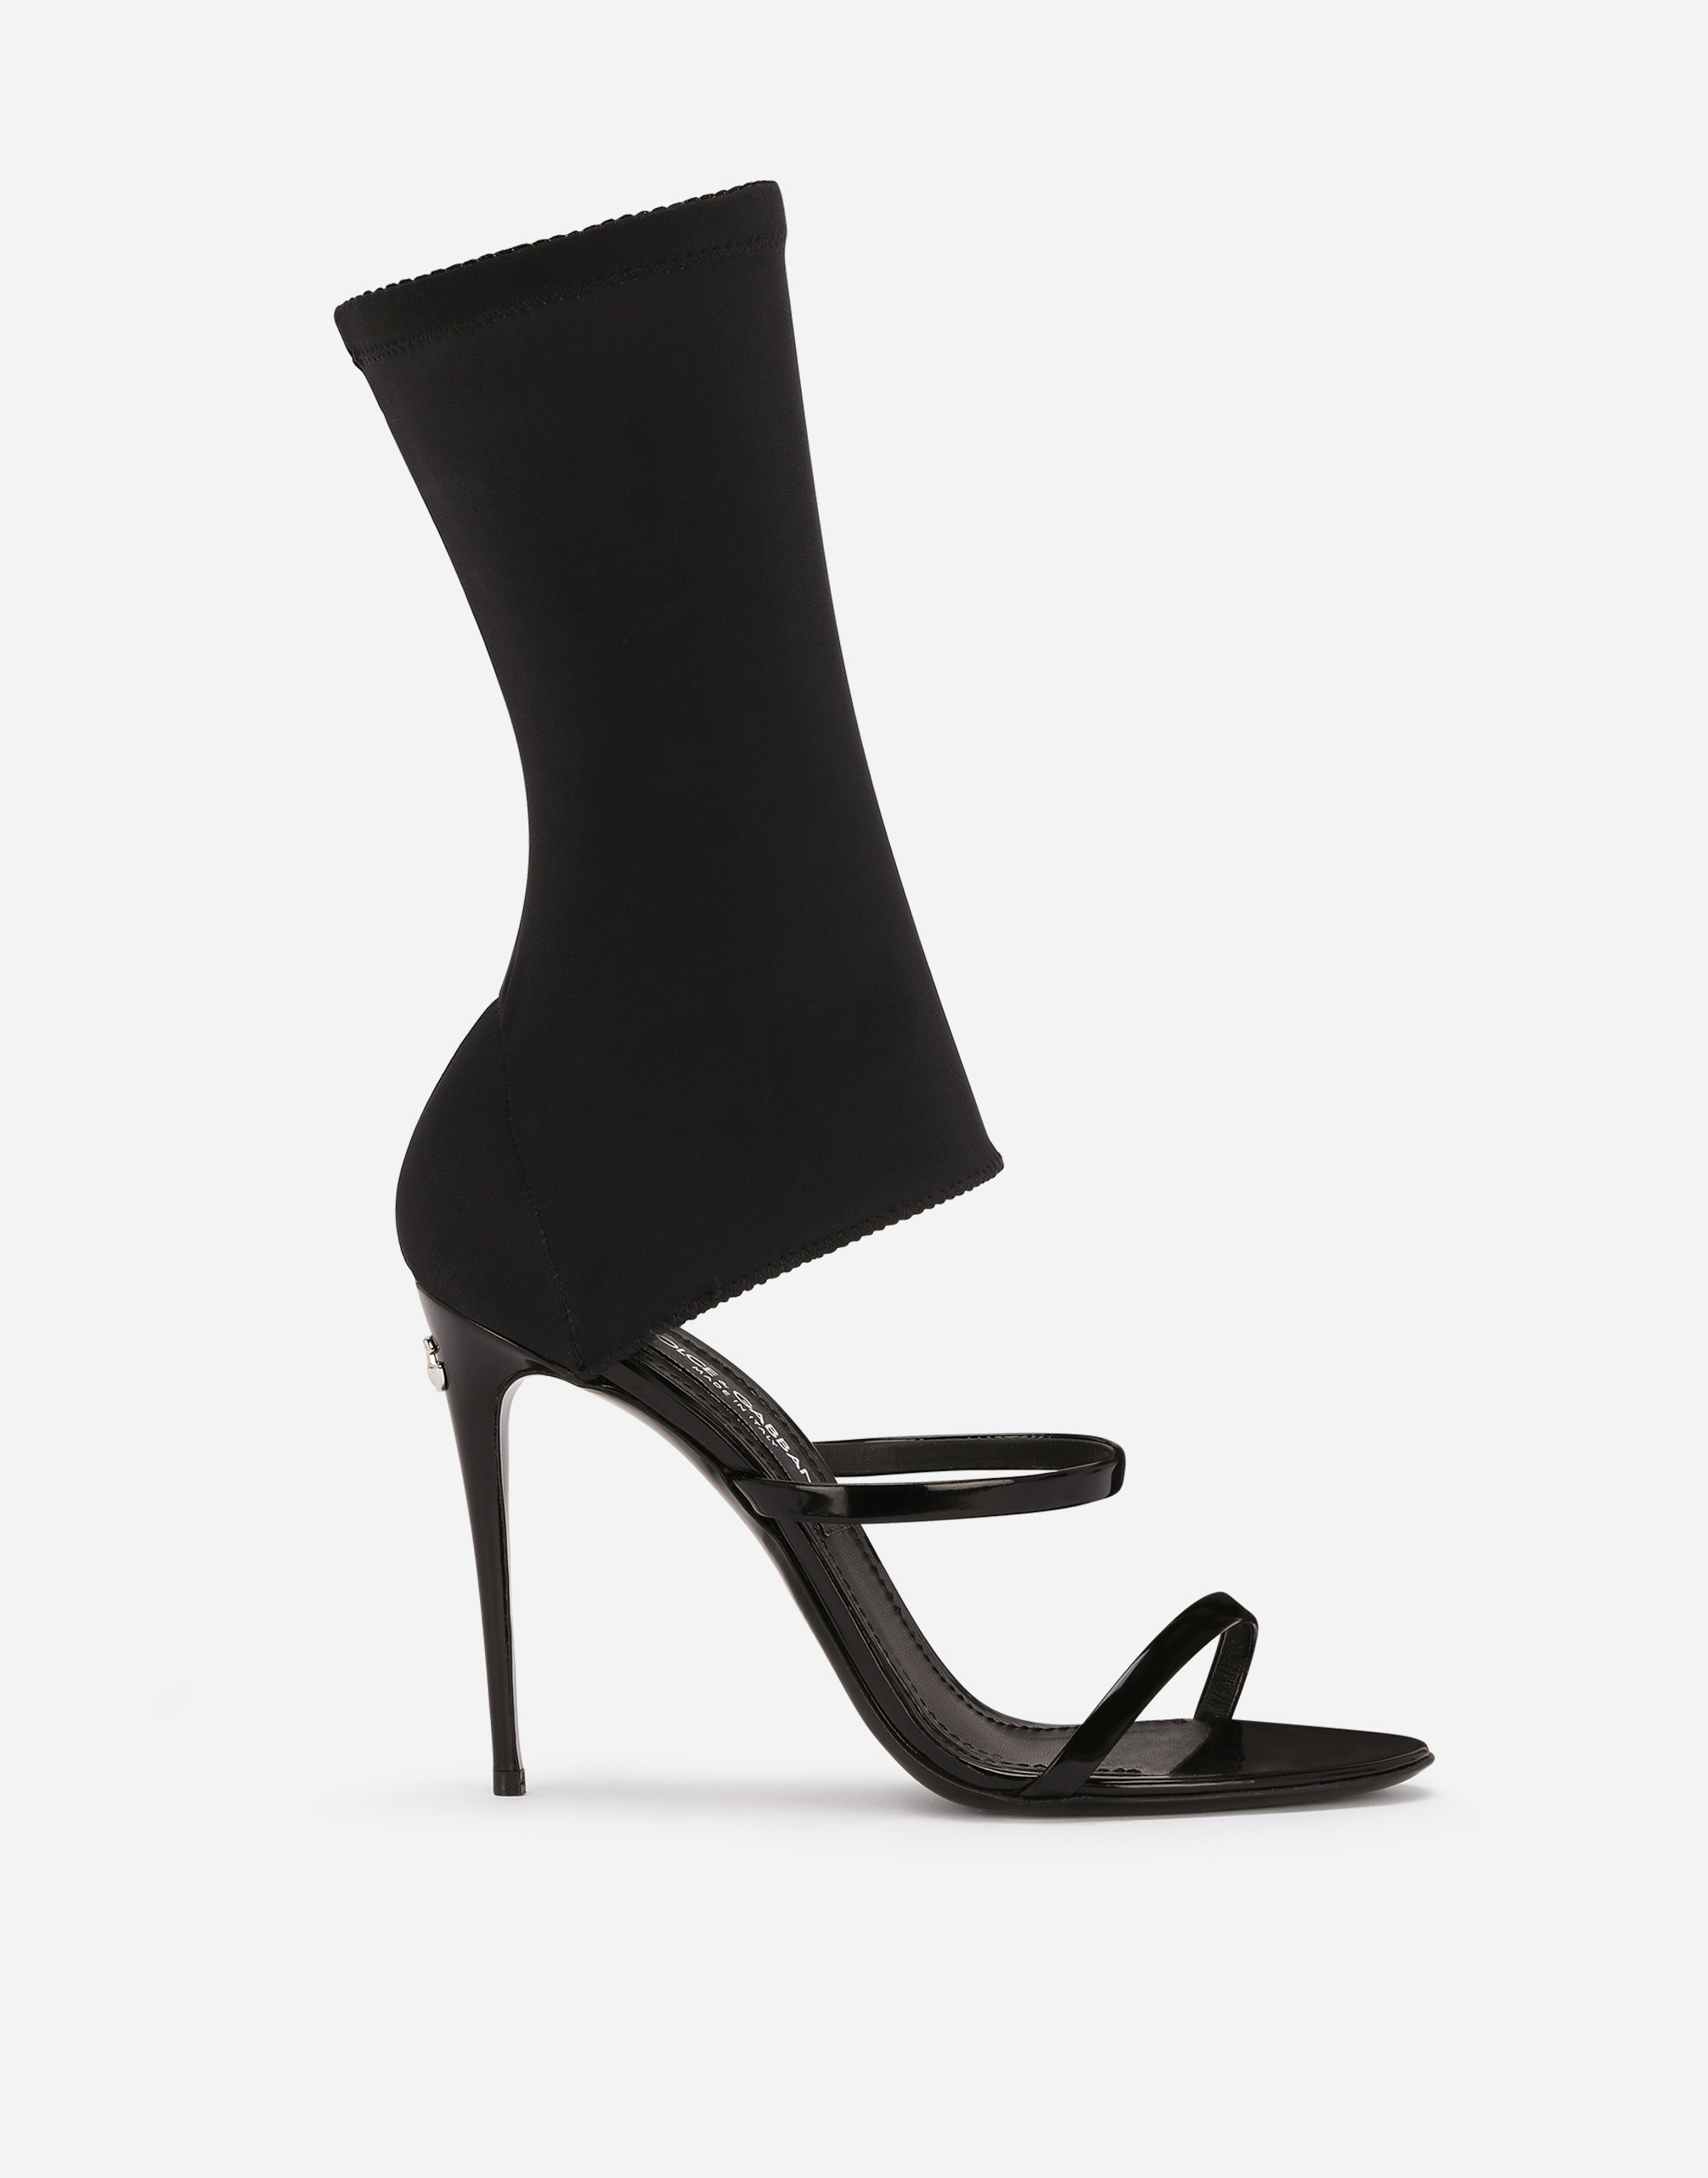 Polished calfskin and spandex fabric sandals in Black